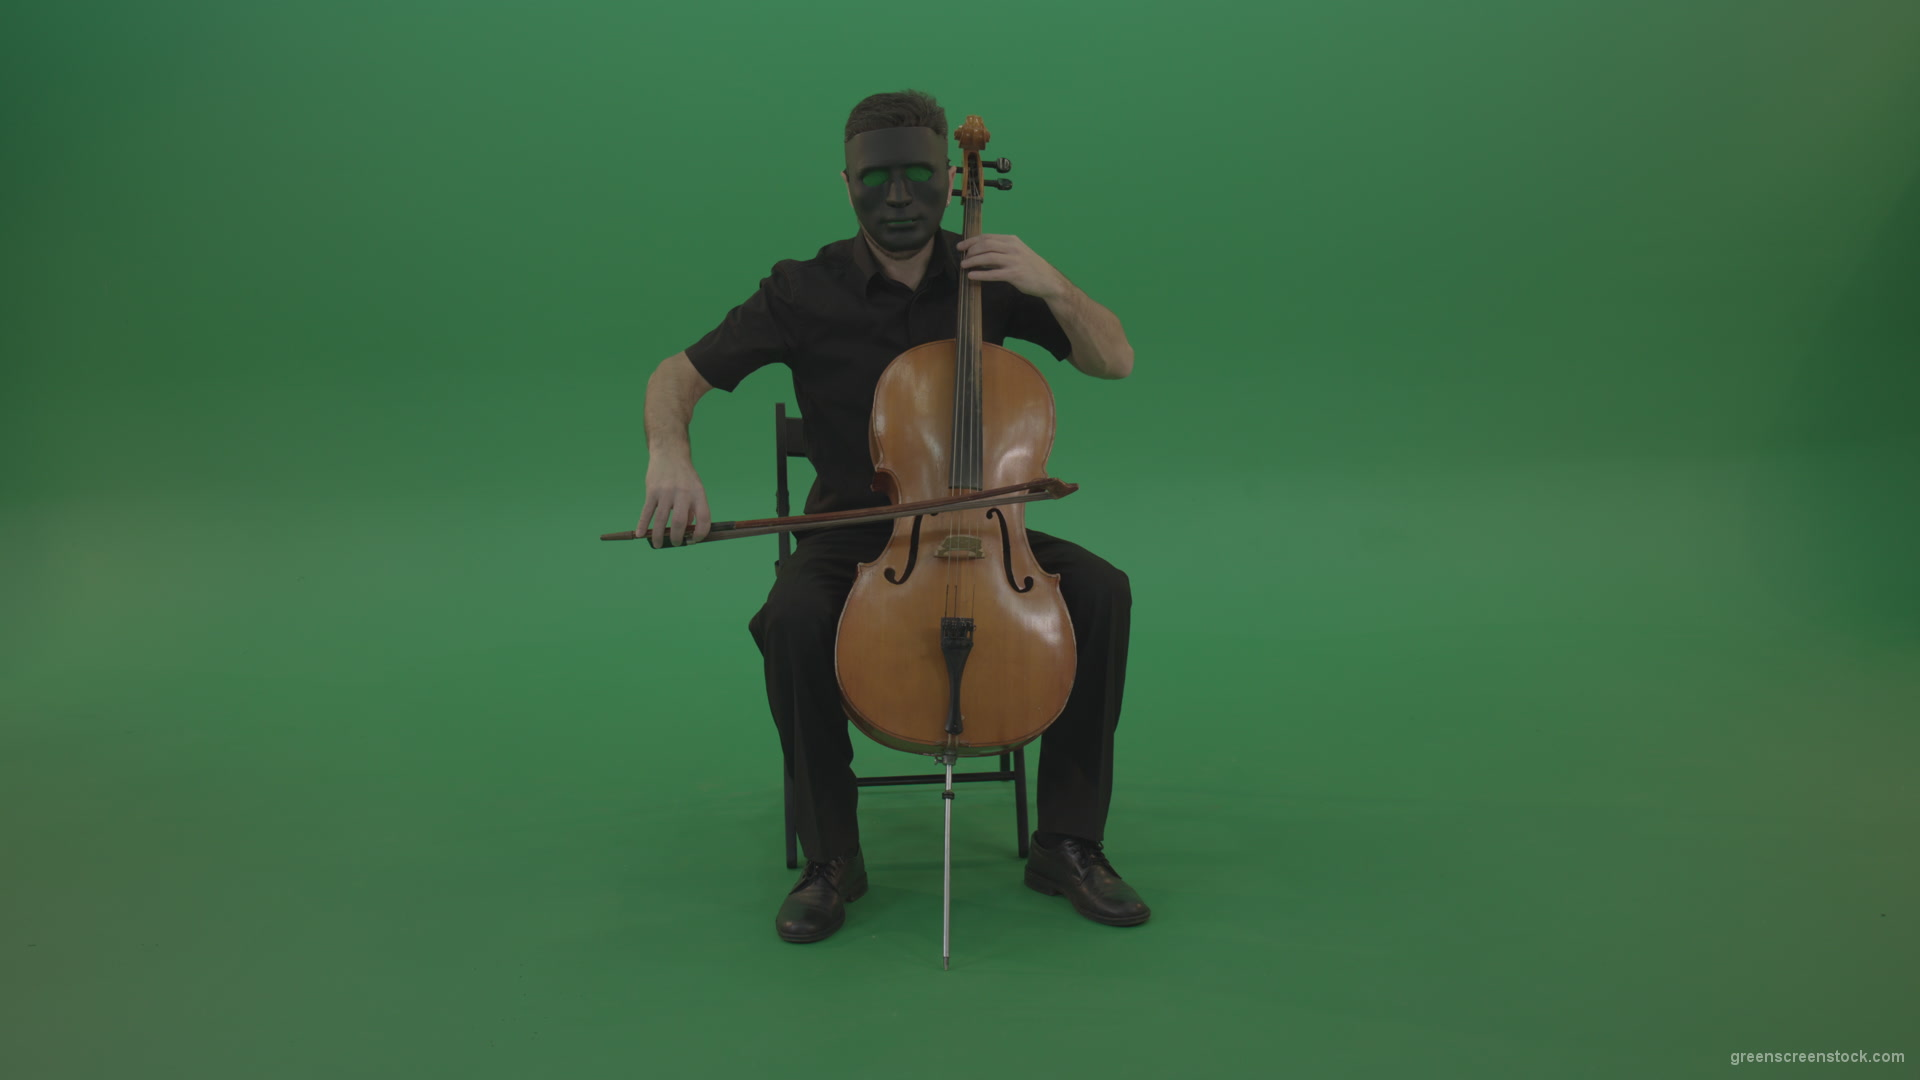 Full-size-man-in-black-wear-and-mask-play-violoncello-cello-strings-music-instrument-isolated-on-green-screen_001 Green Screen Stock